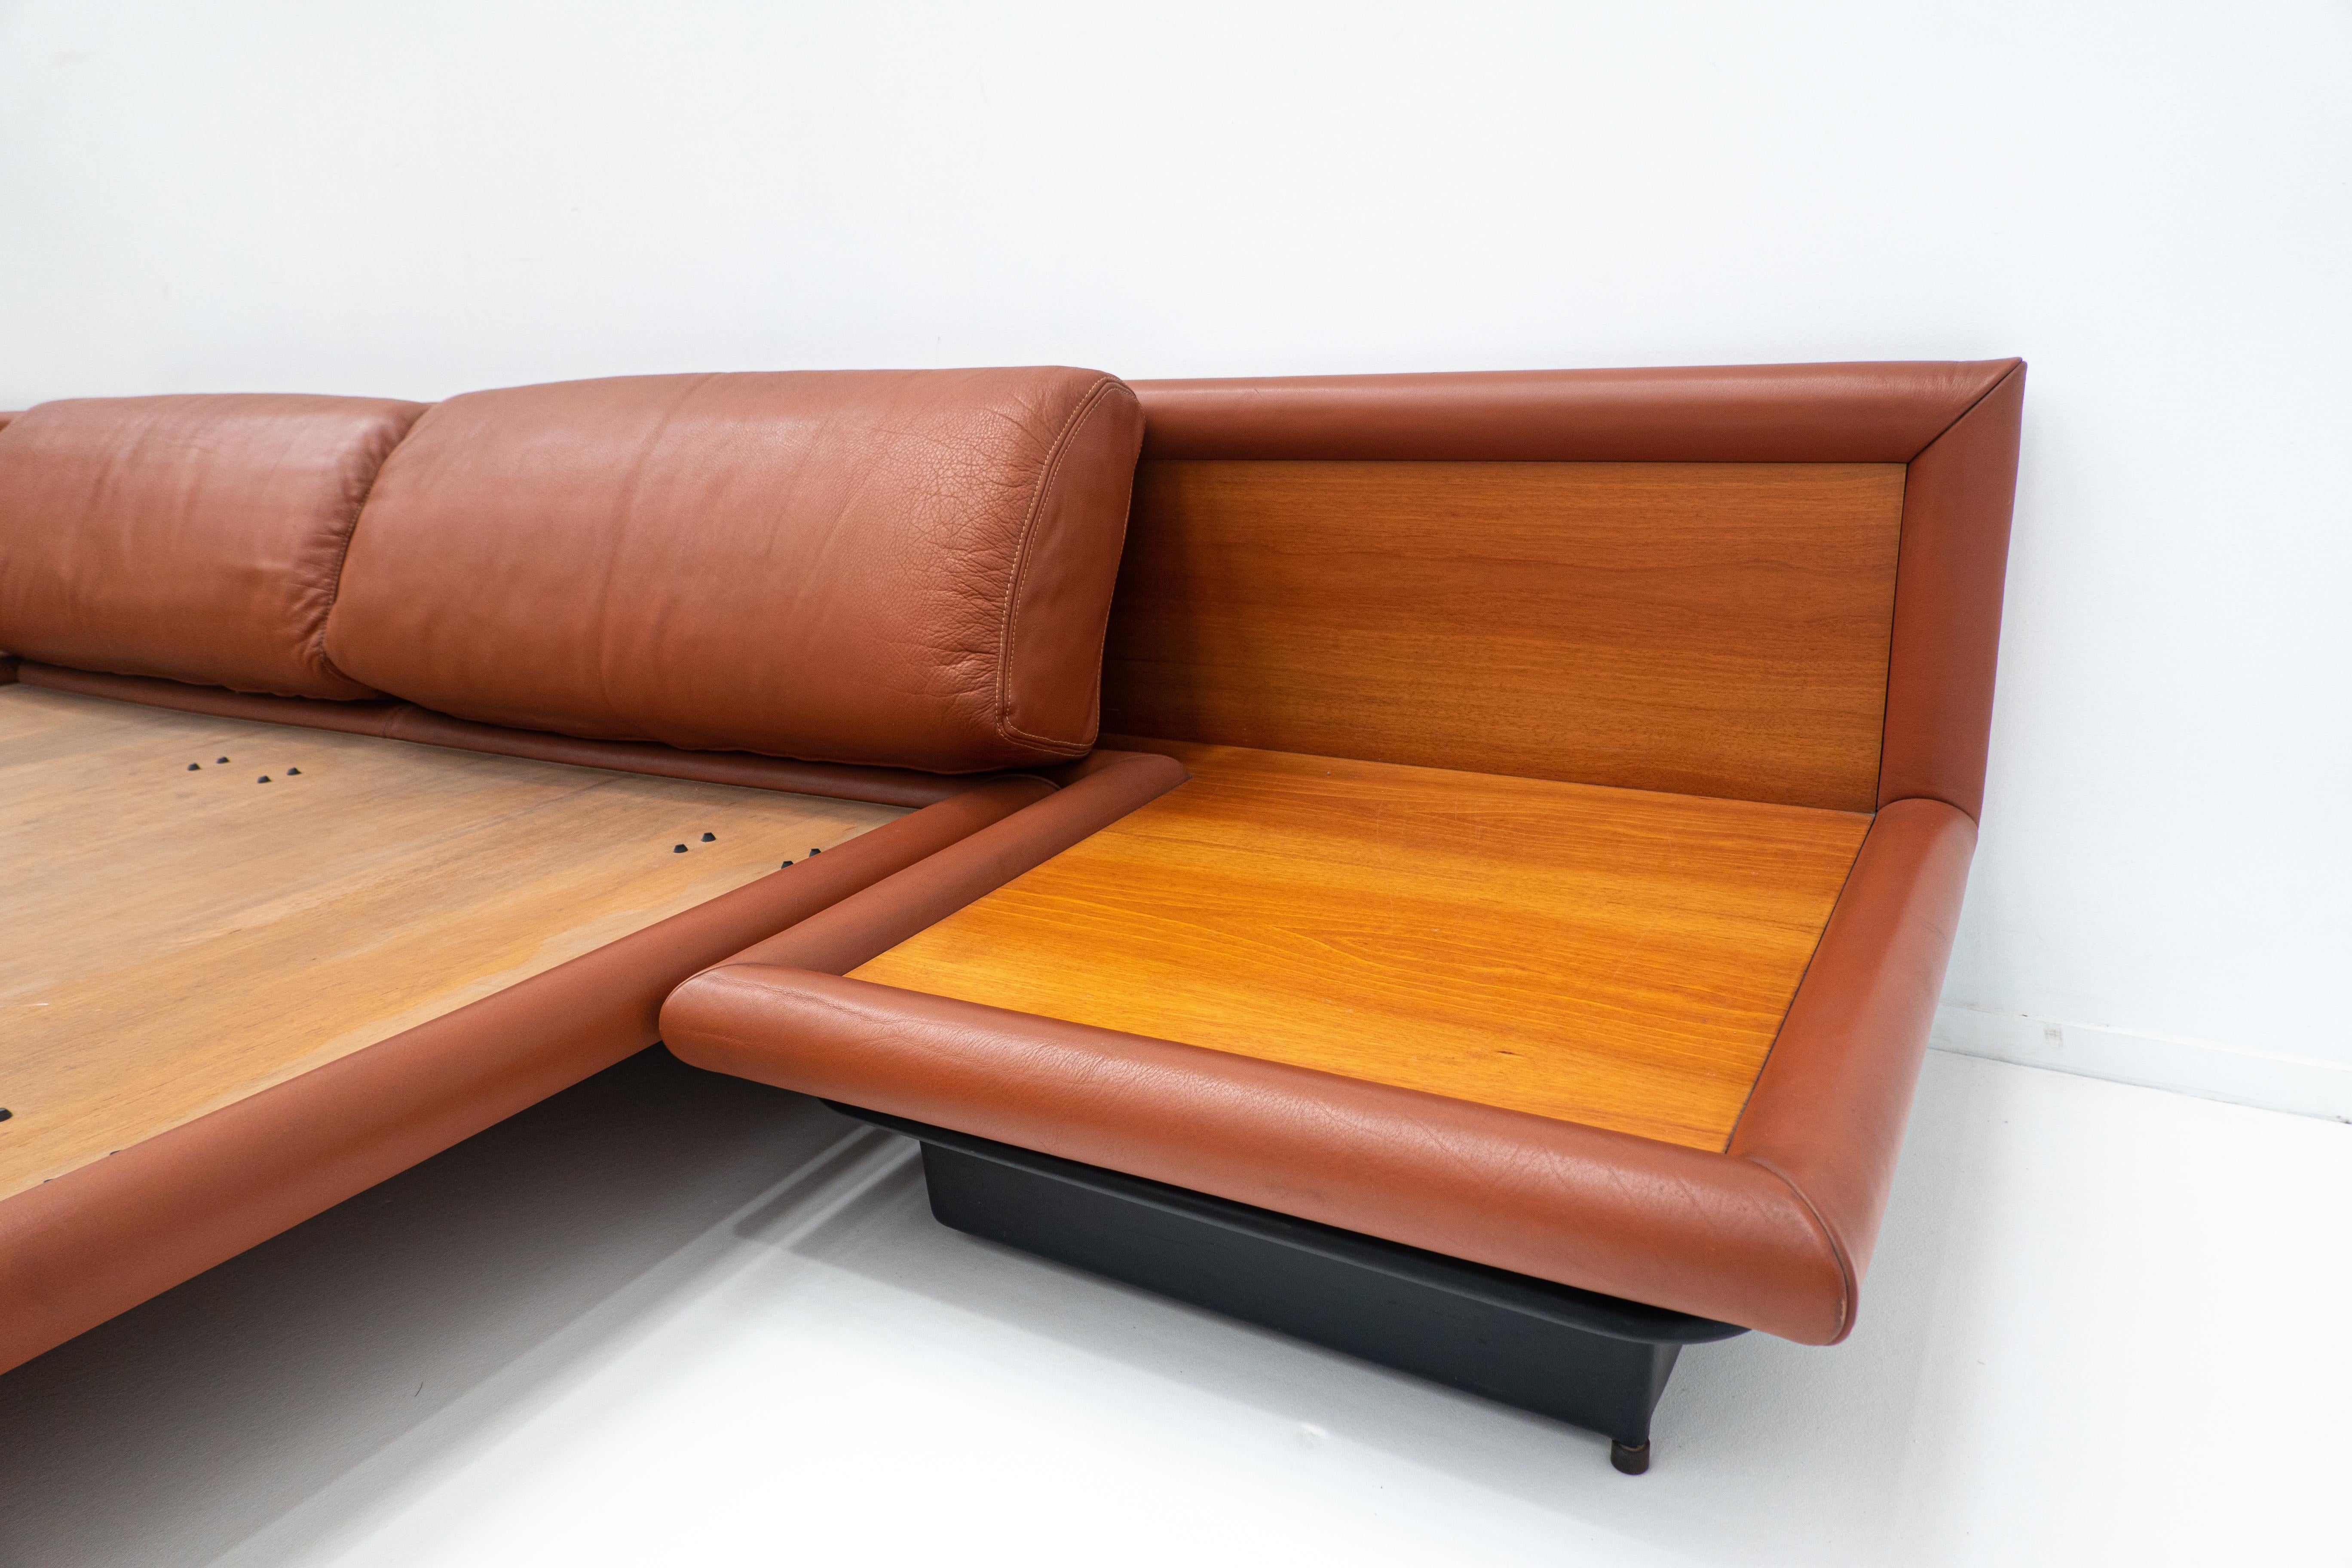 Afra & Tobia Scarpa Cognac Leather Bed Model Morna for Molteni, Italy, 1972 3